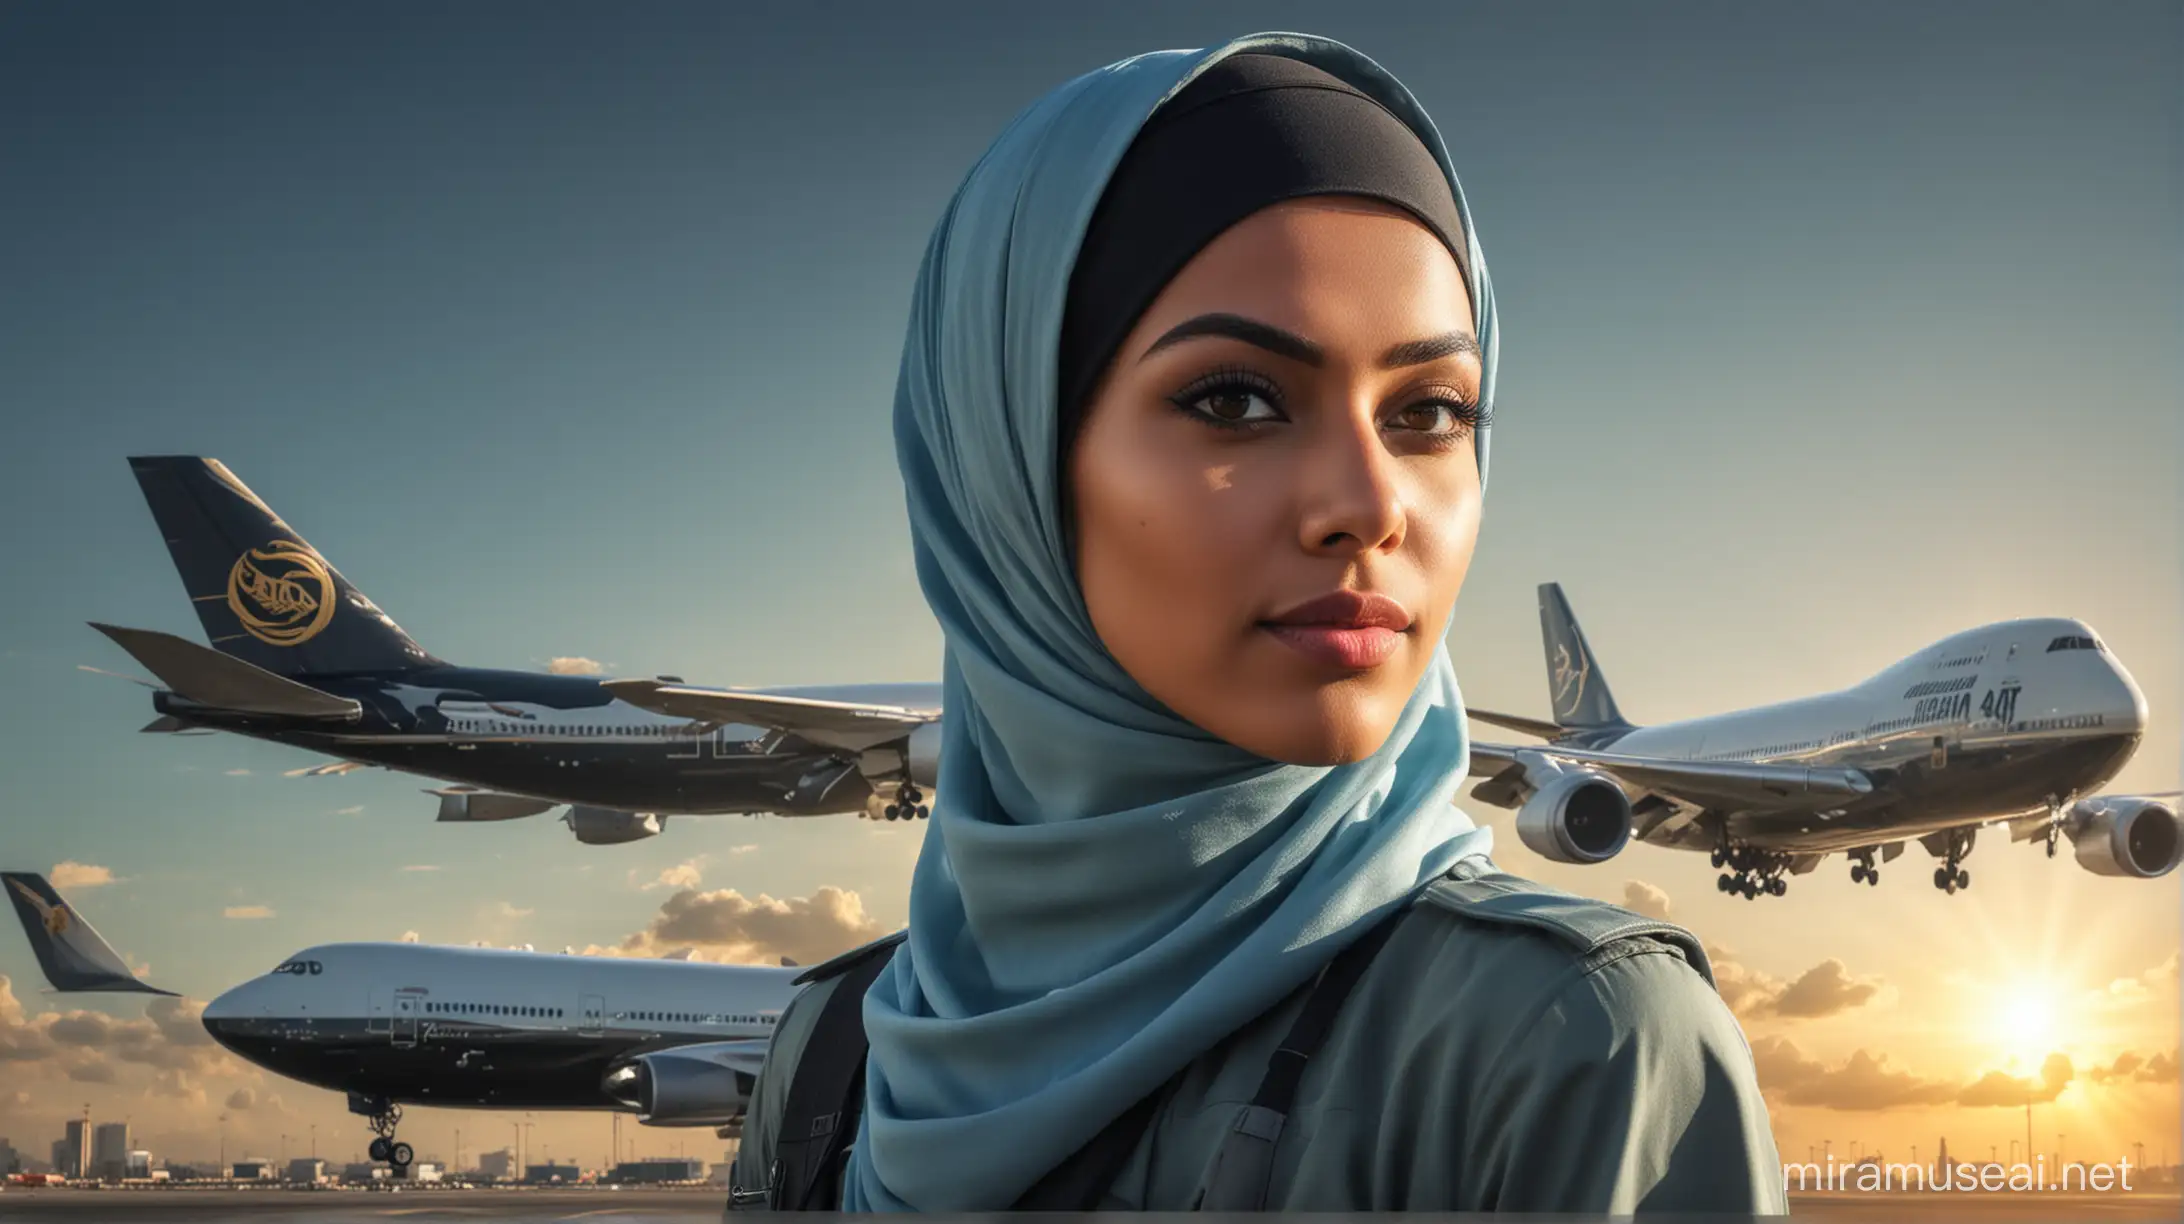 double exposure, 54k, hyperrealistic HDR photo, like a 747 Boeing, is on a take off area, ready to fly, in such detail, the background of a mighty hijab Malay woman wearing a pilot's uniform with black shade and pilot hat. with the setting sun giving an morning blue sky, dramatic, reflective atmosphere